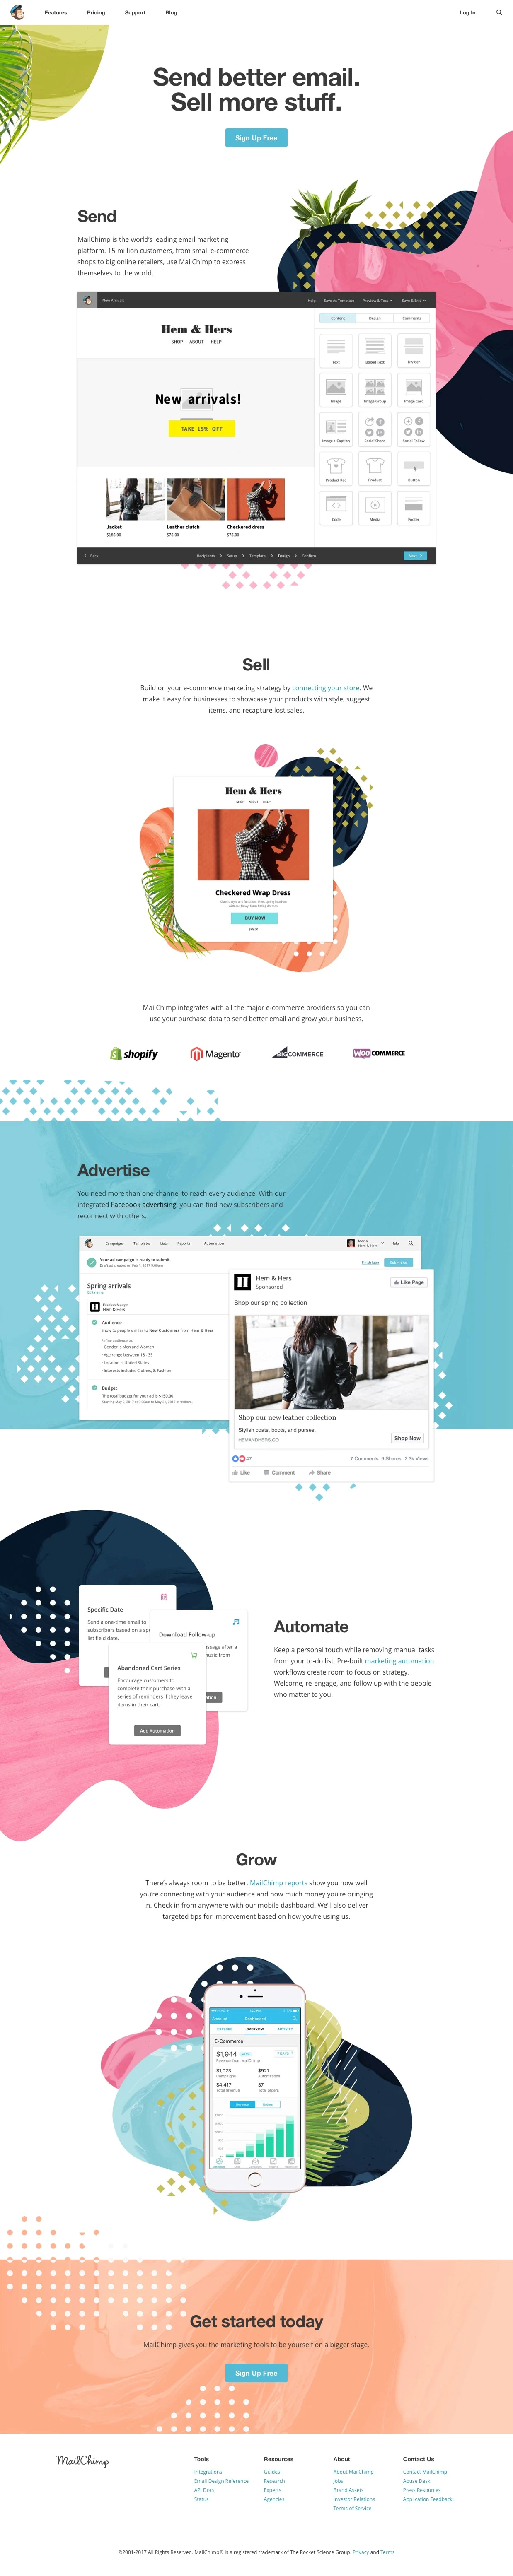 MailChimp Landing Page Example: MailChimp is the world’s leading email marketing platform. 